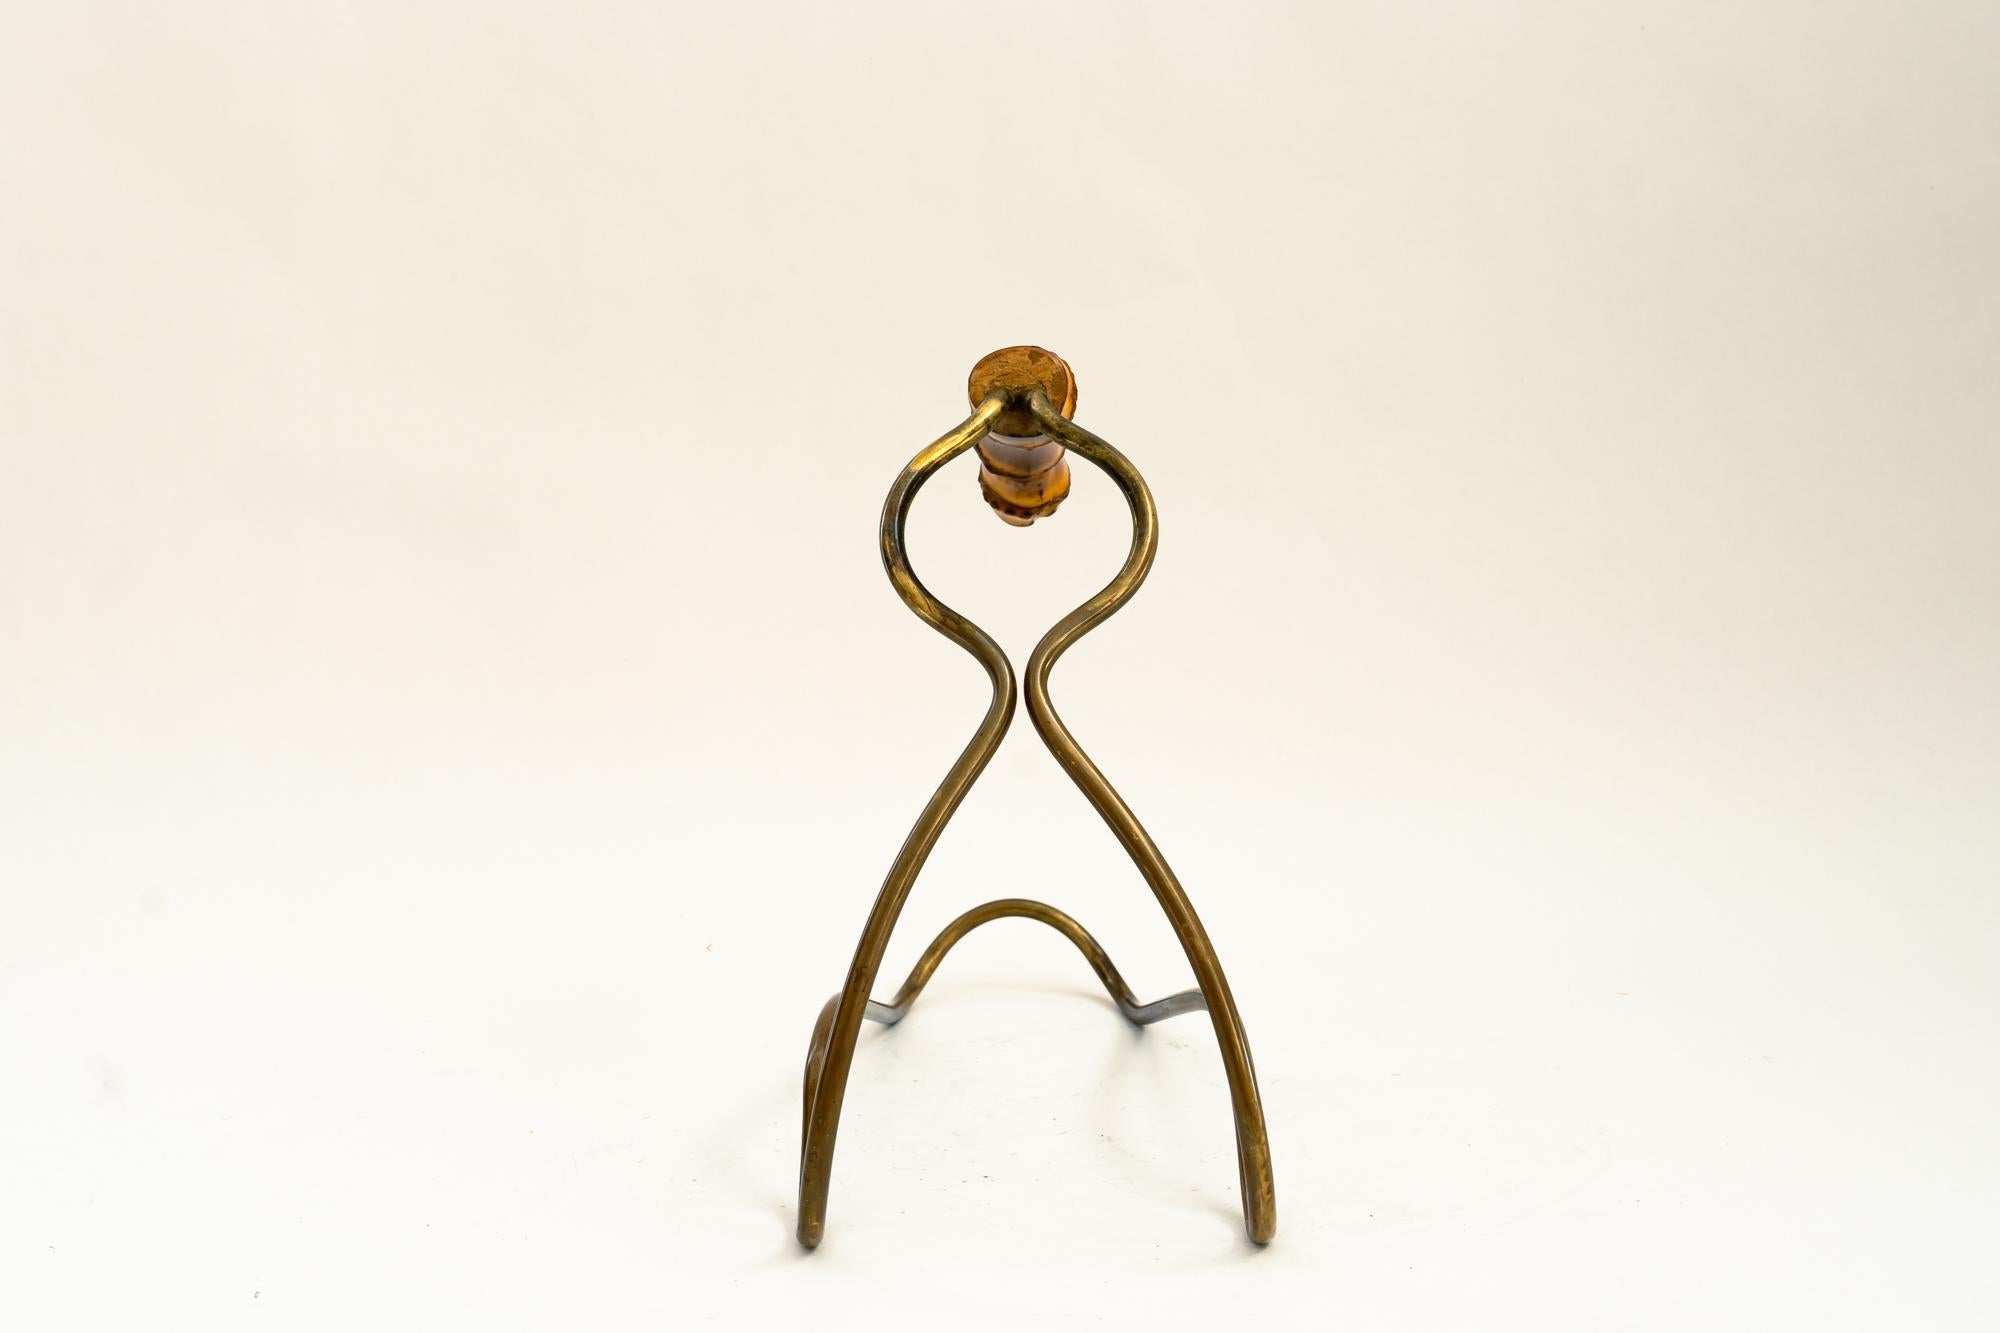 Bottle Holder by Auböck Around, 1950s For Sale 4